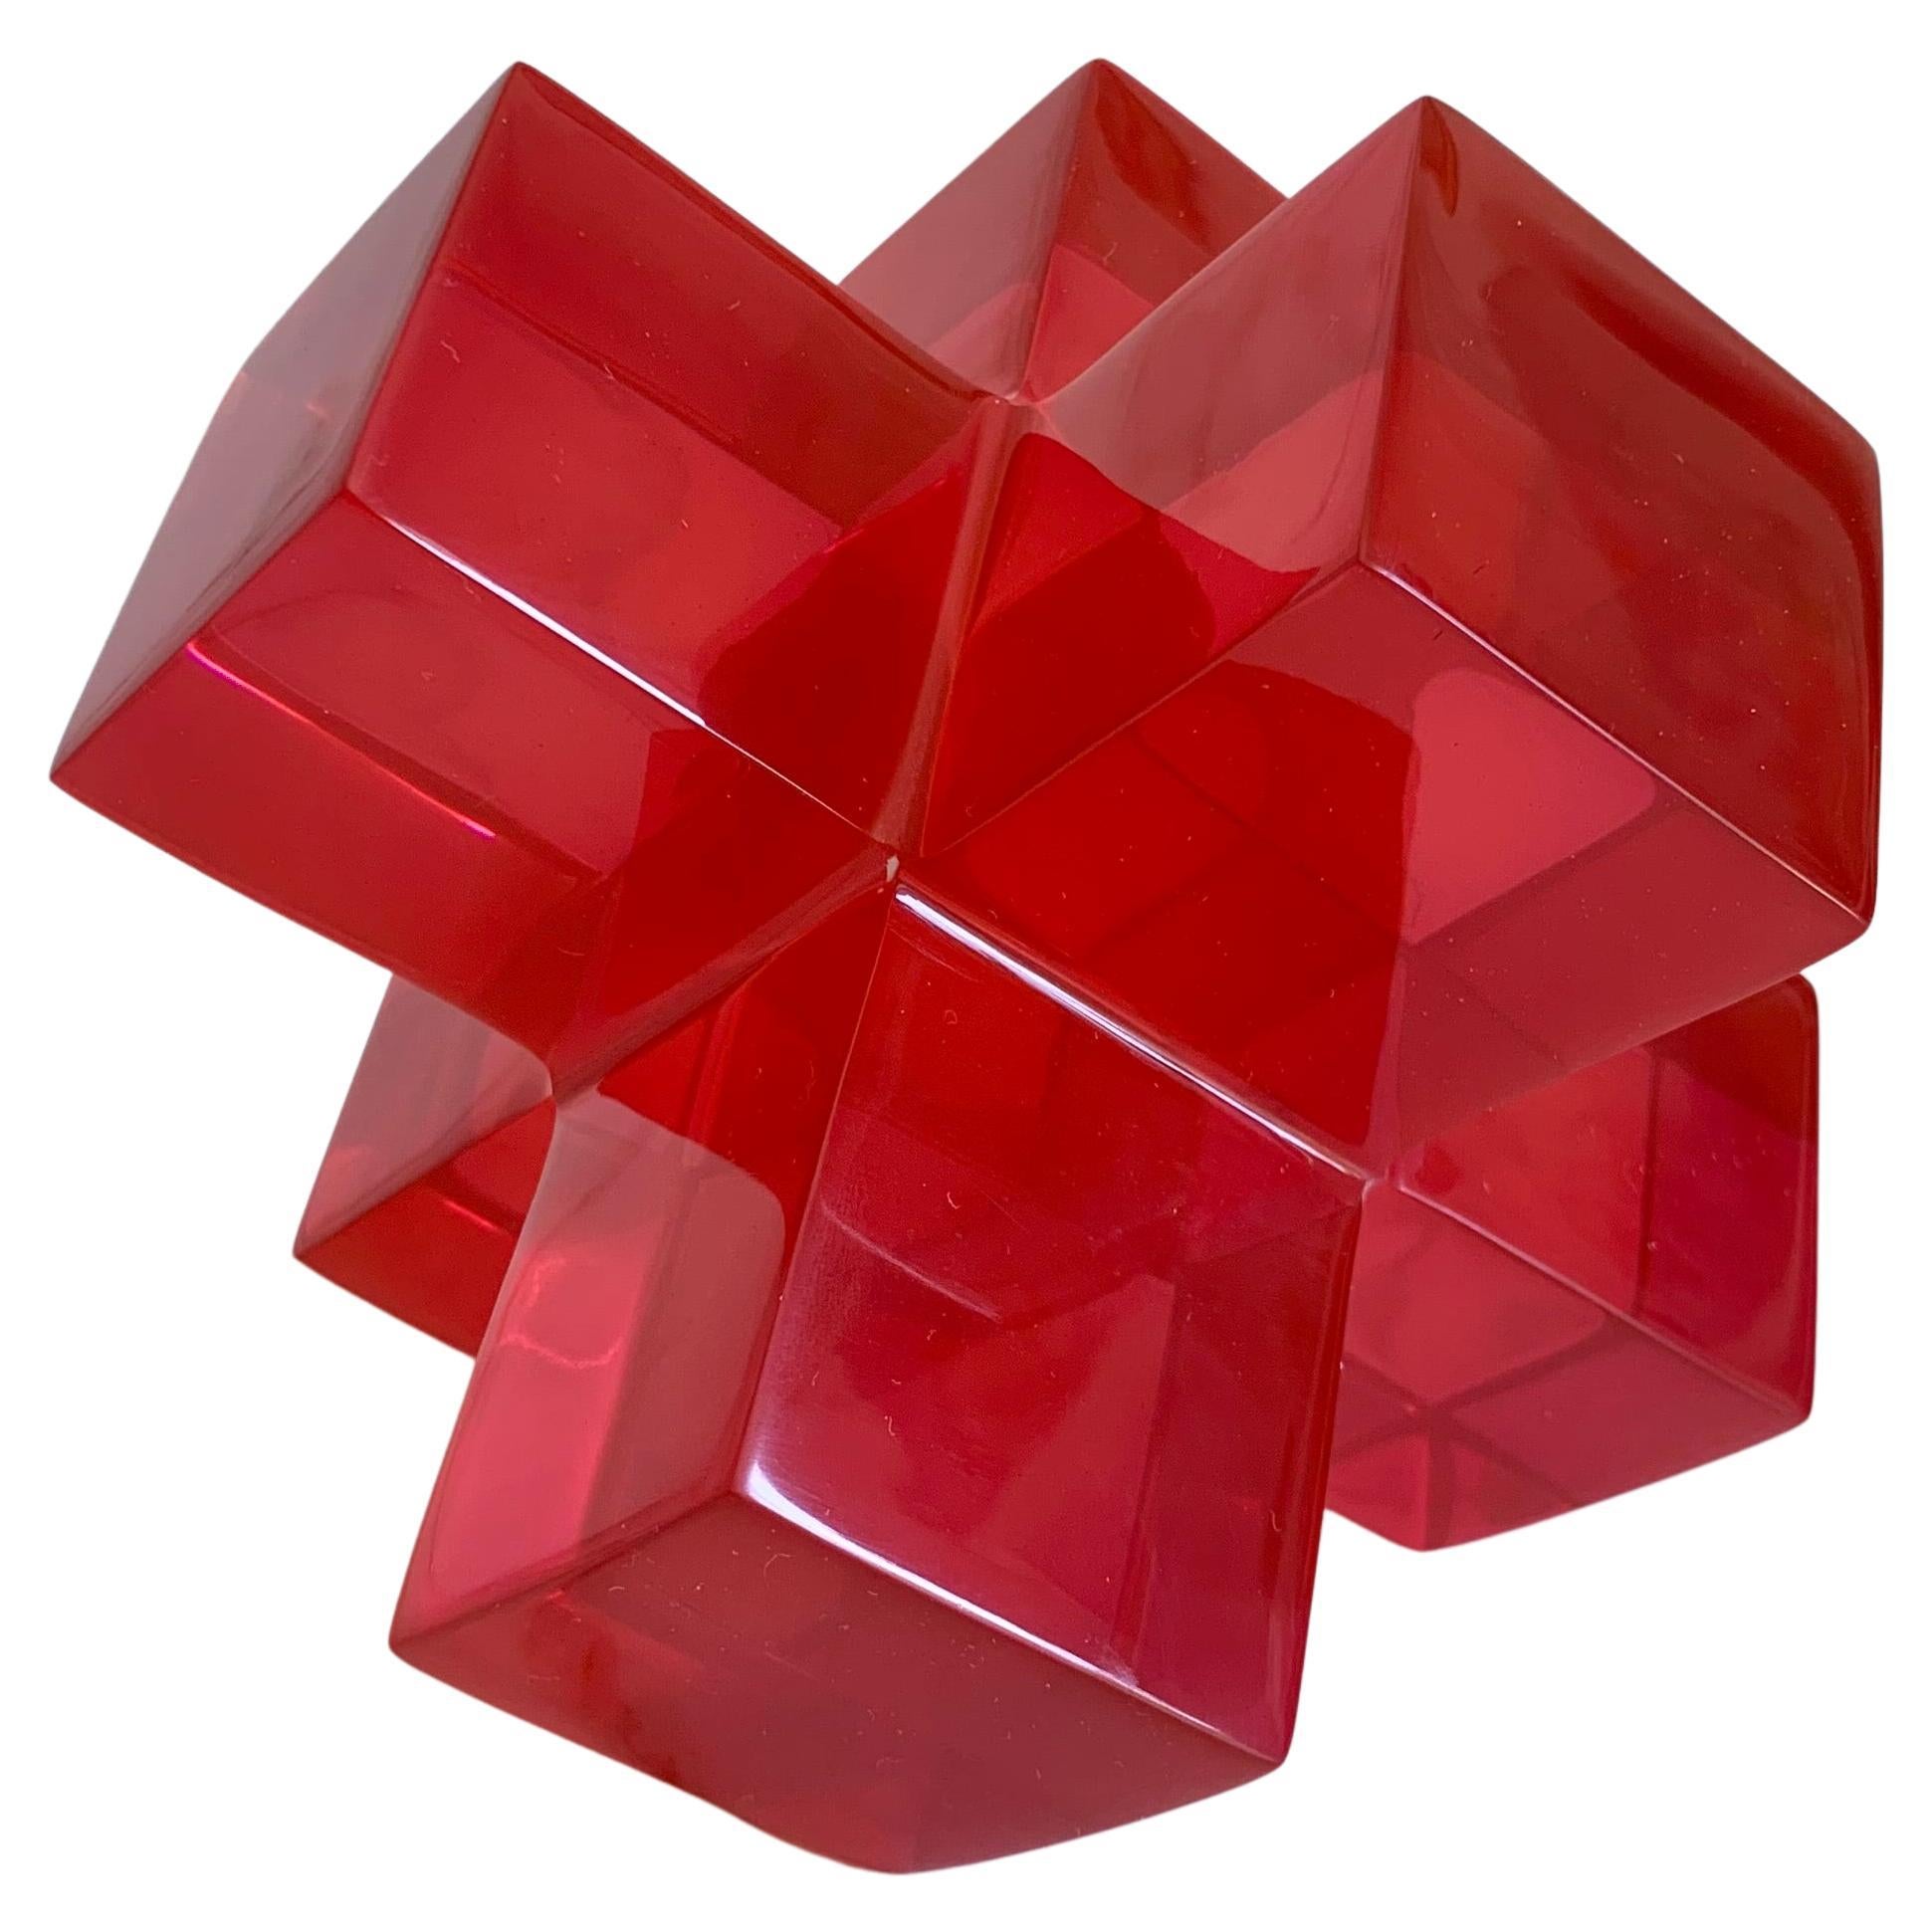 Geometric Sculpture in Polished Strawberry Pink Resin by Paola Valle For Sale